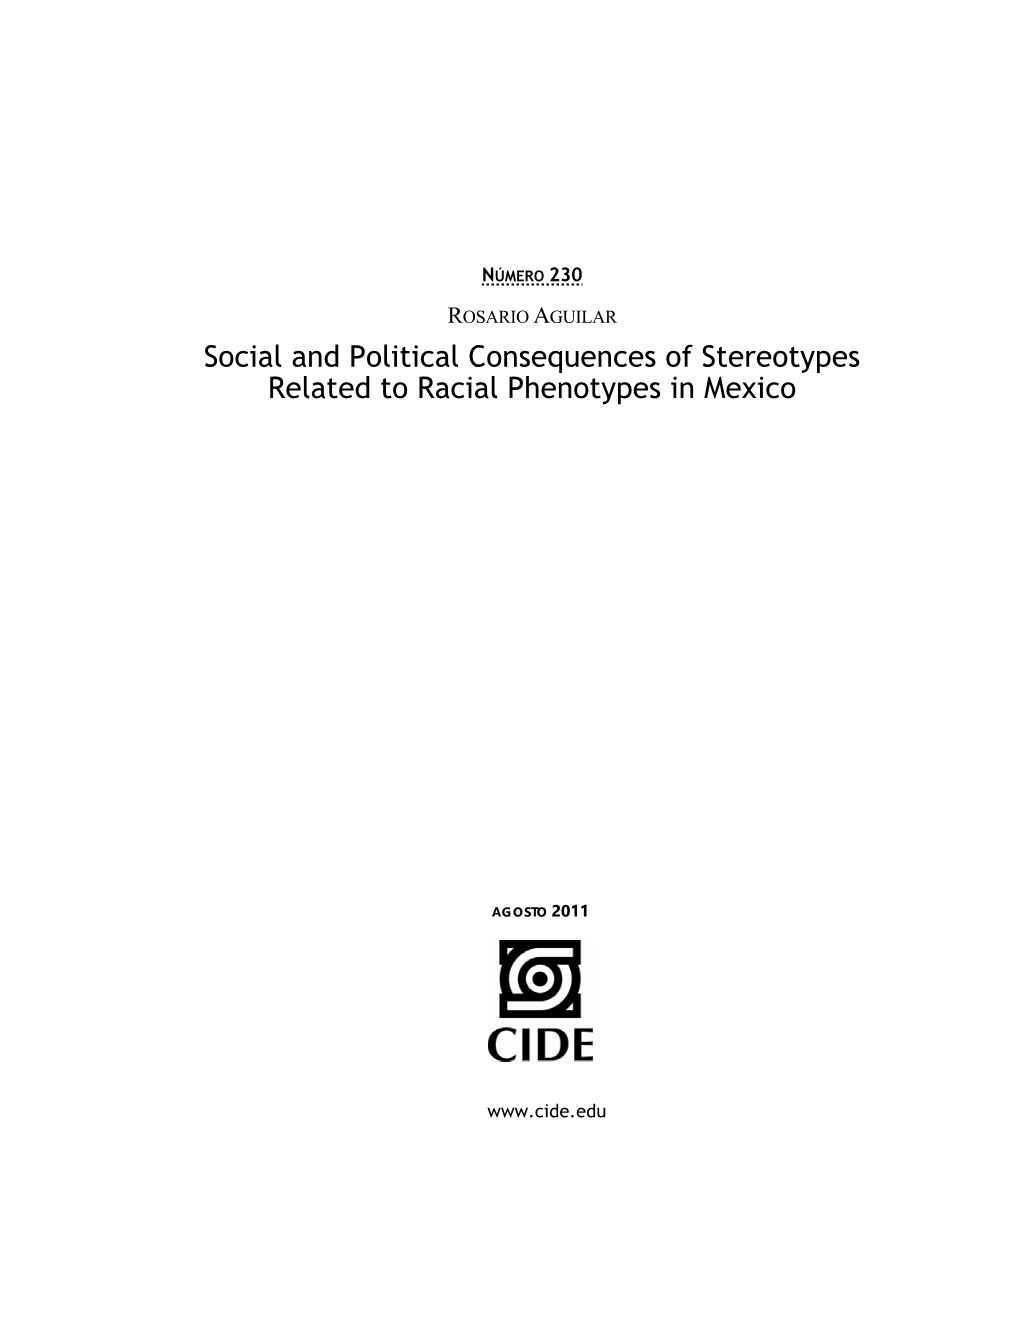 Social and Political Consequences of Stereotypes Related to Racial Phenotypes in Mexico